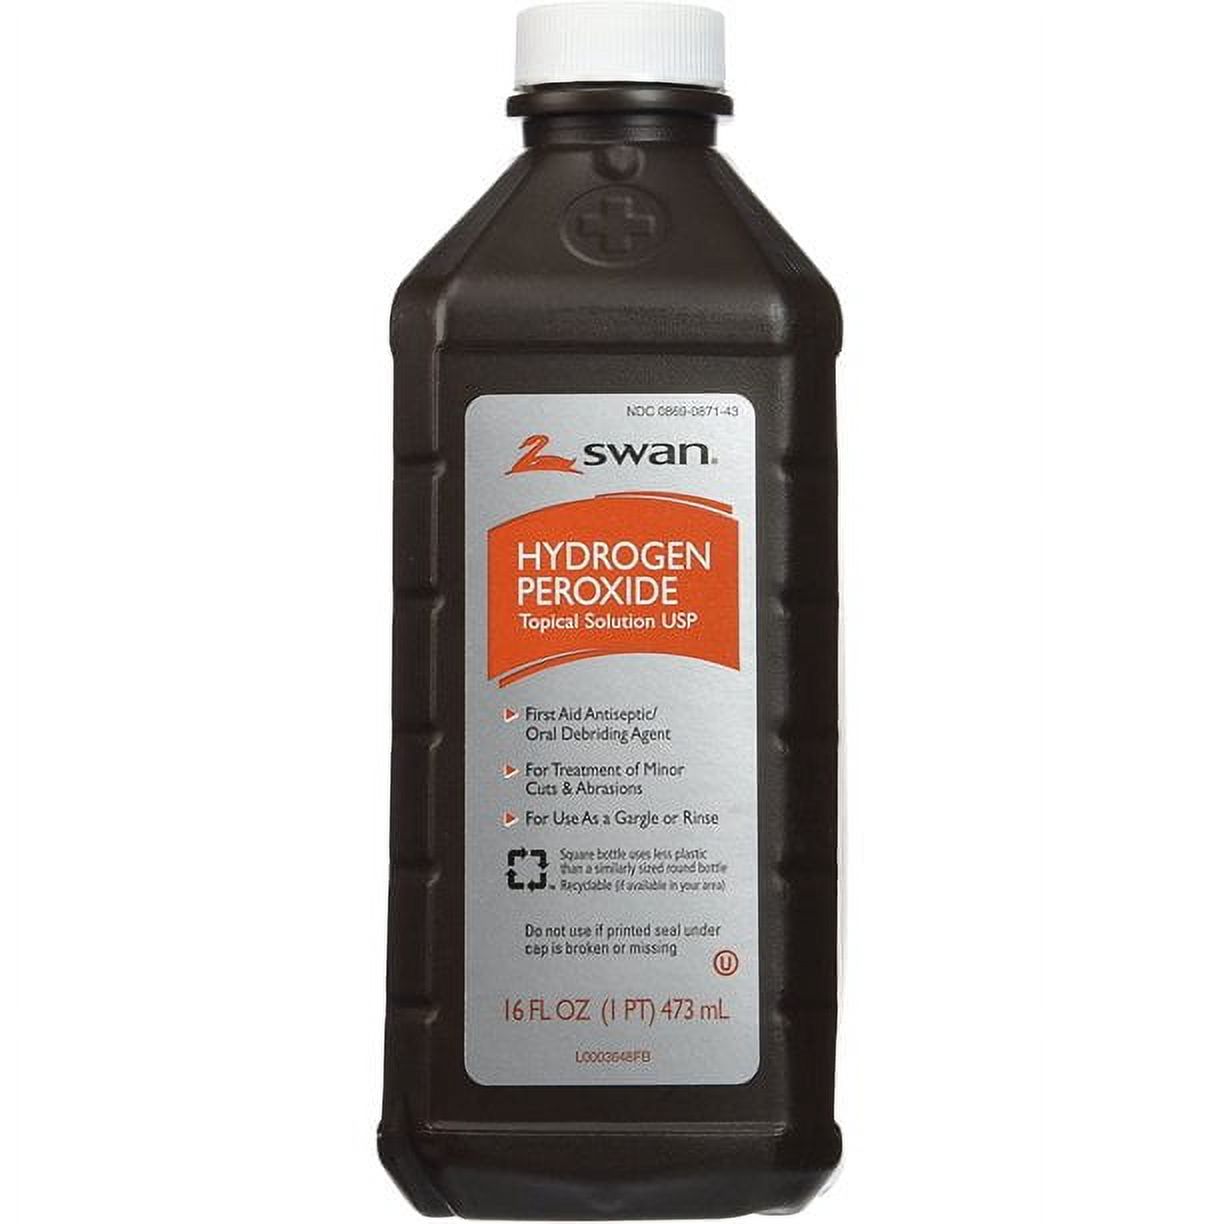 Swan Hydrogen Peroxide Topical Solution, 16 oz - image 1 of 4